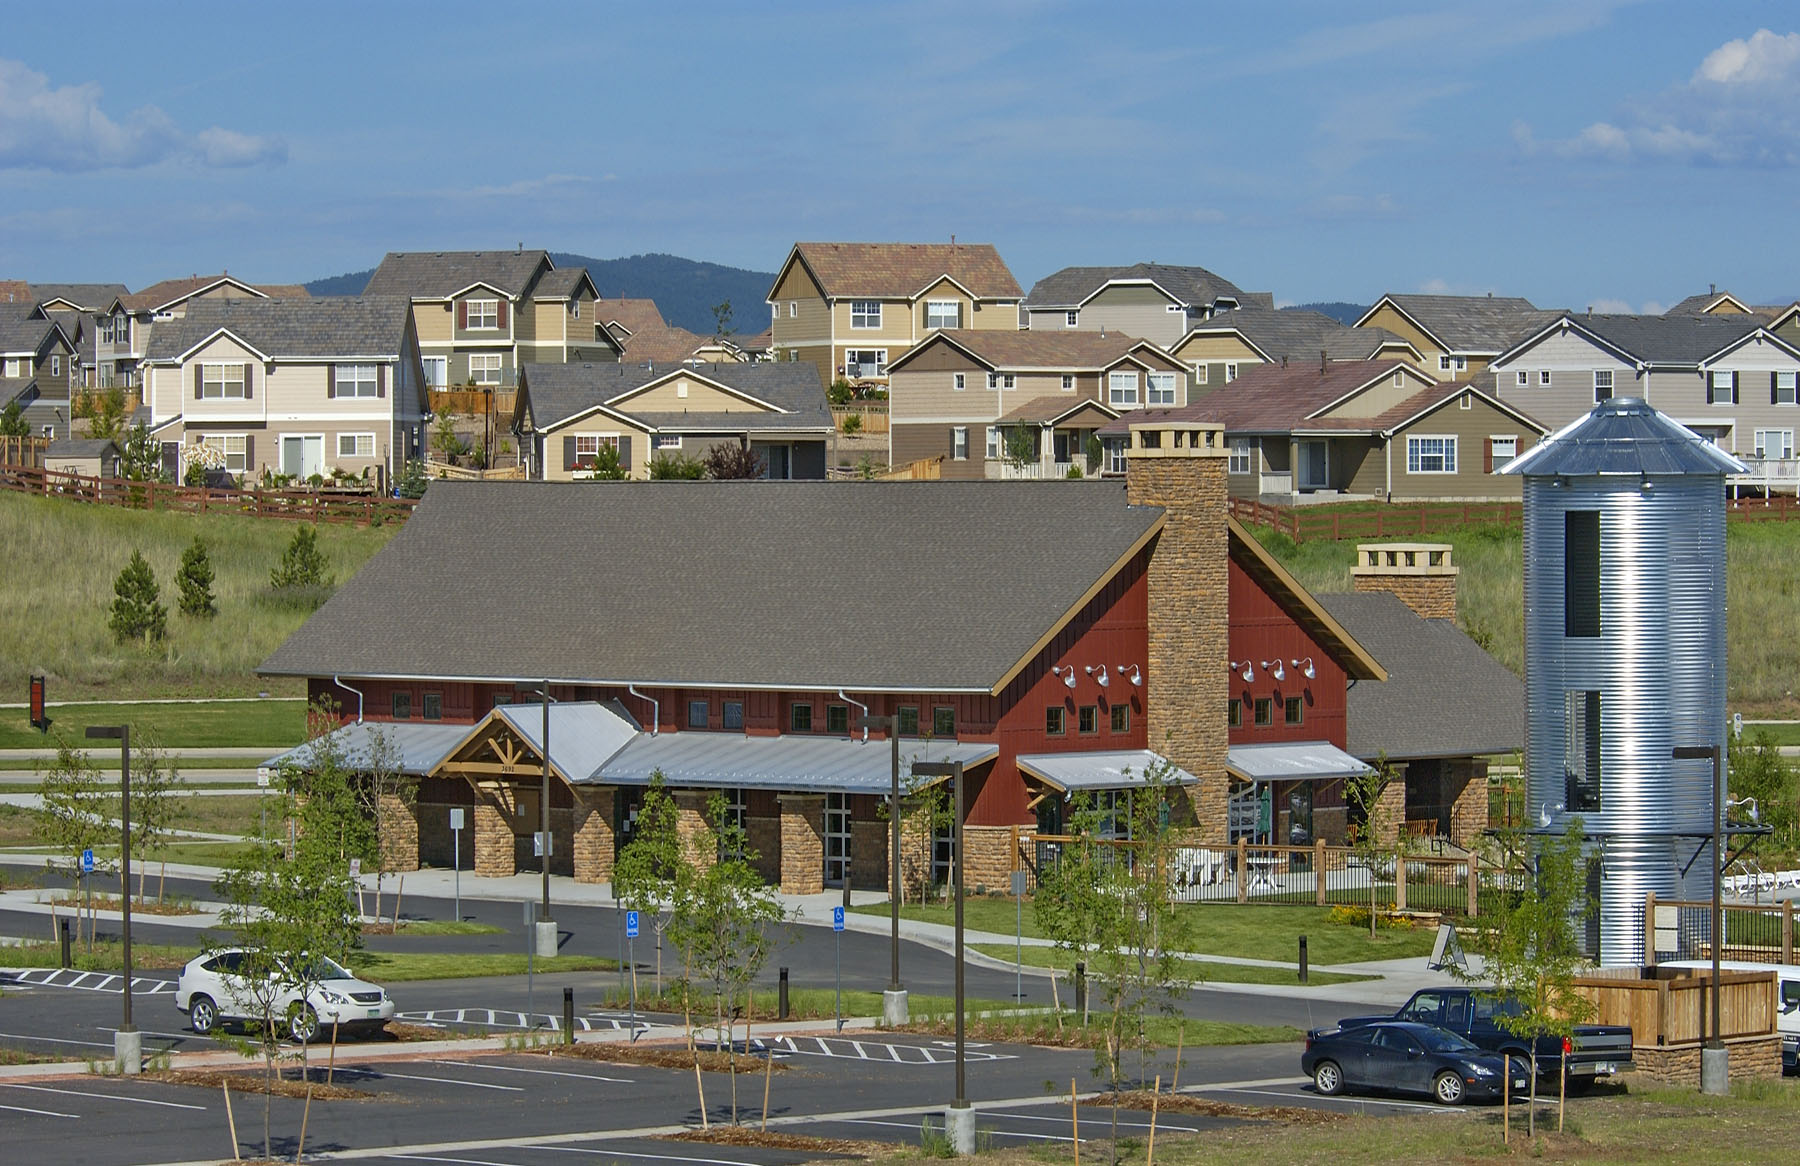 The Meadows is a master planned community located in scenic Castle Rock just south of Denver, Colorado. 